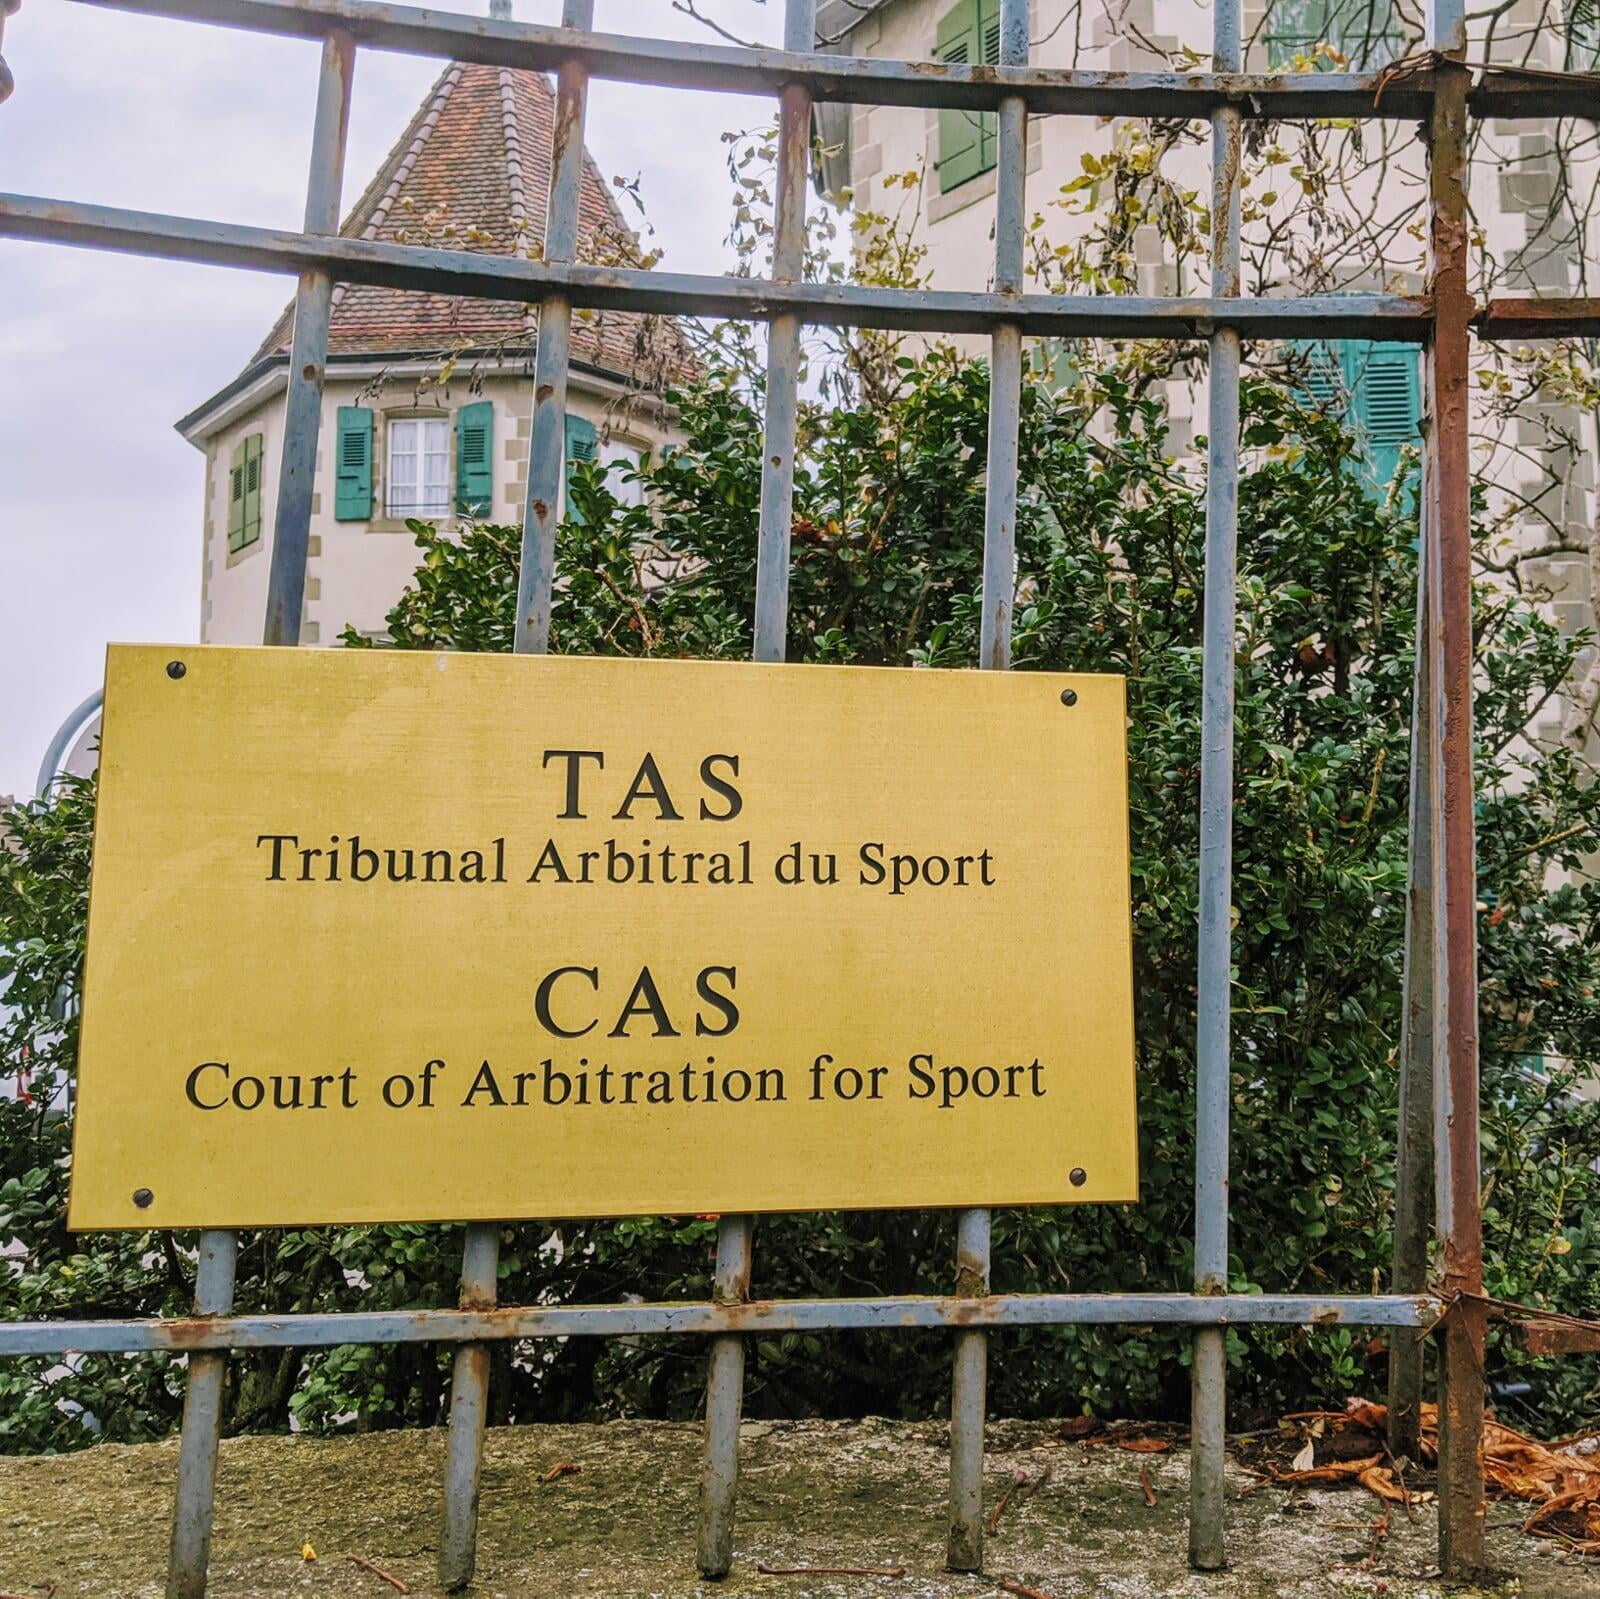 Court of Arbitration for Sport - CAS